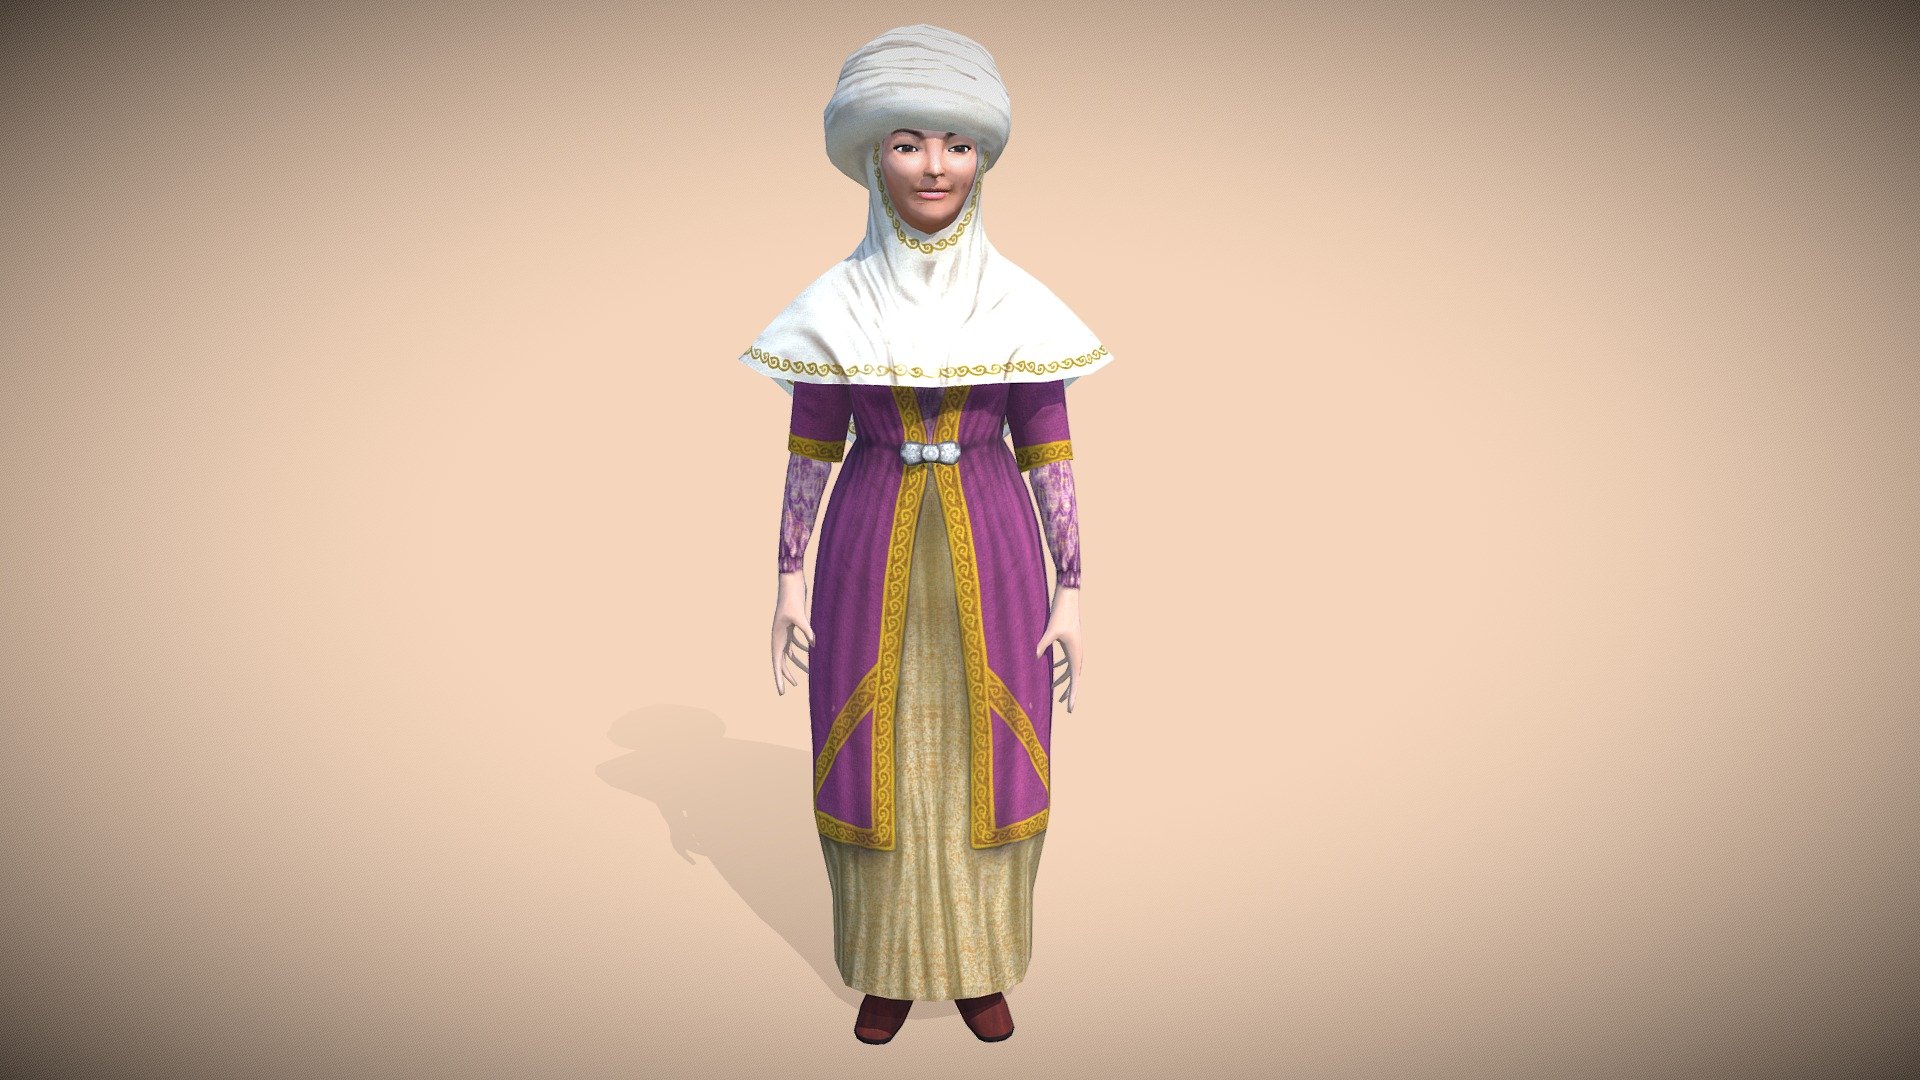 Woman in Kazakh National Costume Animated - Low Poly

Optimized for games (game ready), Suitable for close-UPS, illustrations and various renderings 3d model